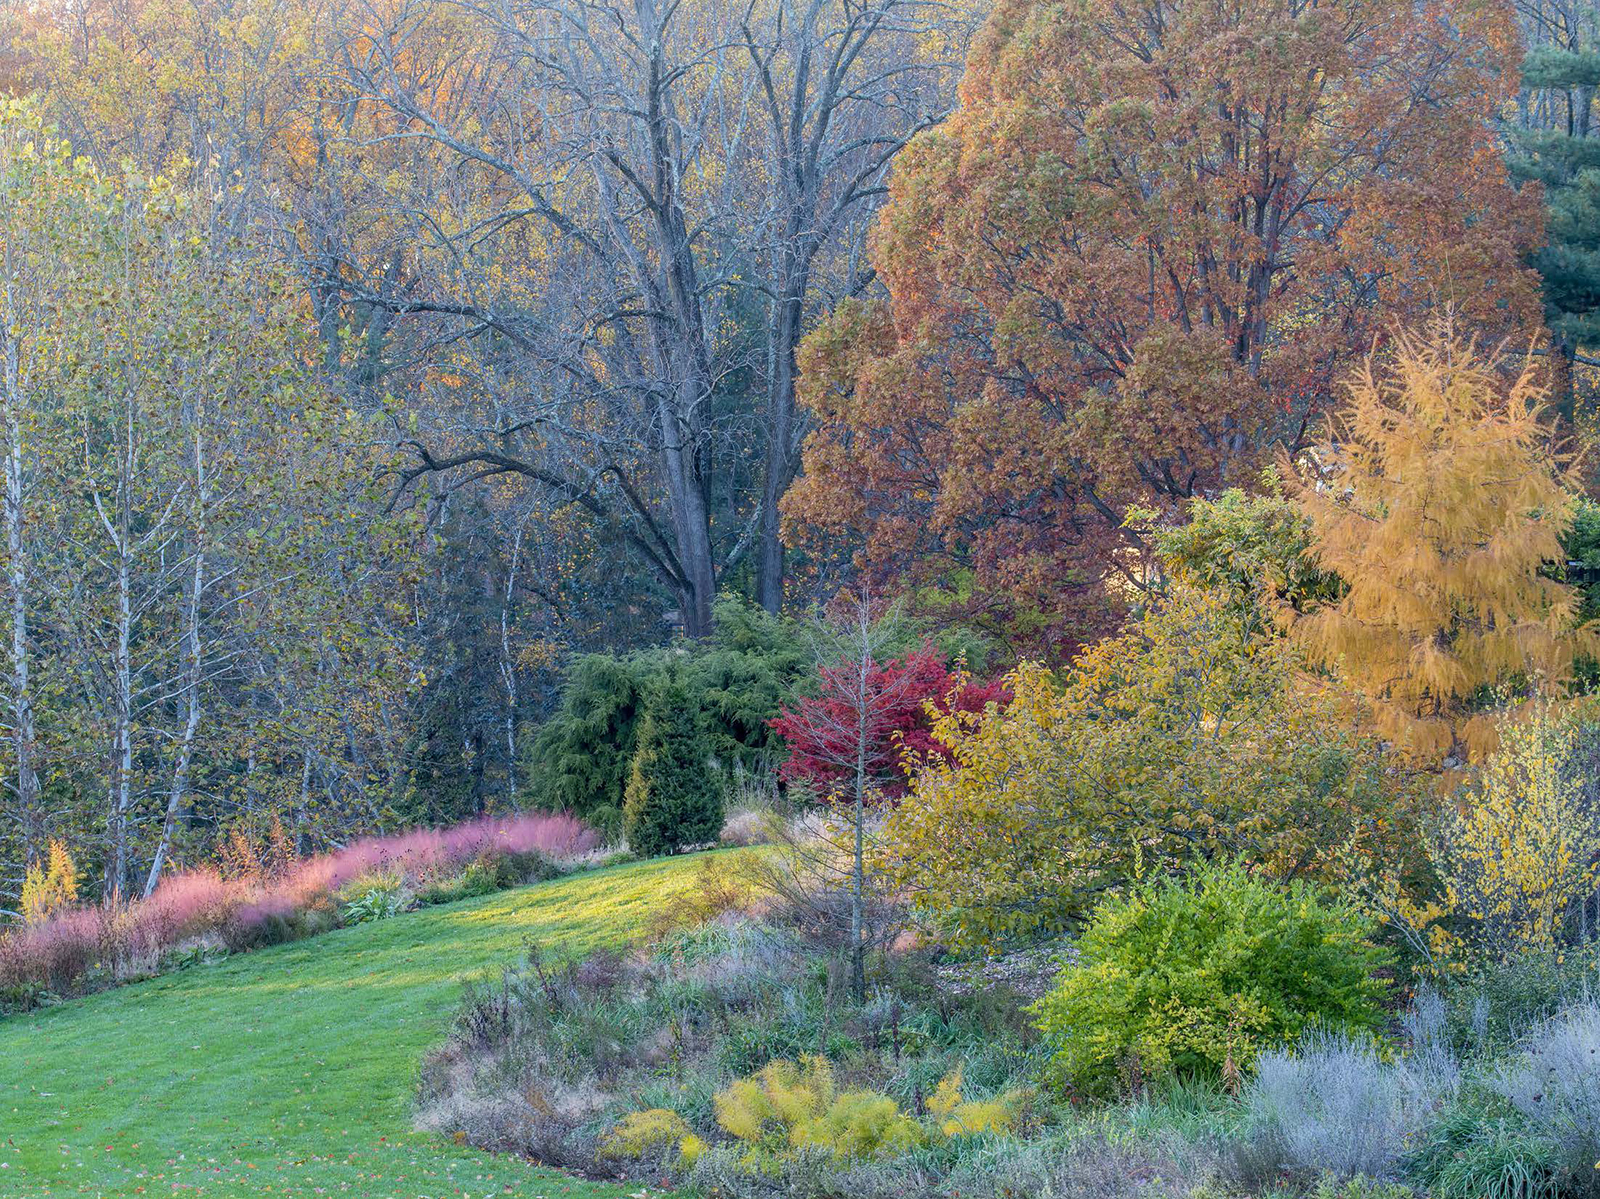 An autumnal view toward the Pond Gardens Rock Ledge and the Winter Shrub - photo 4